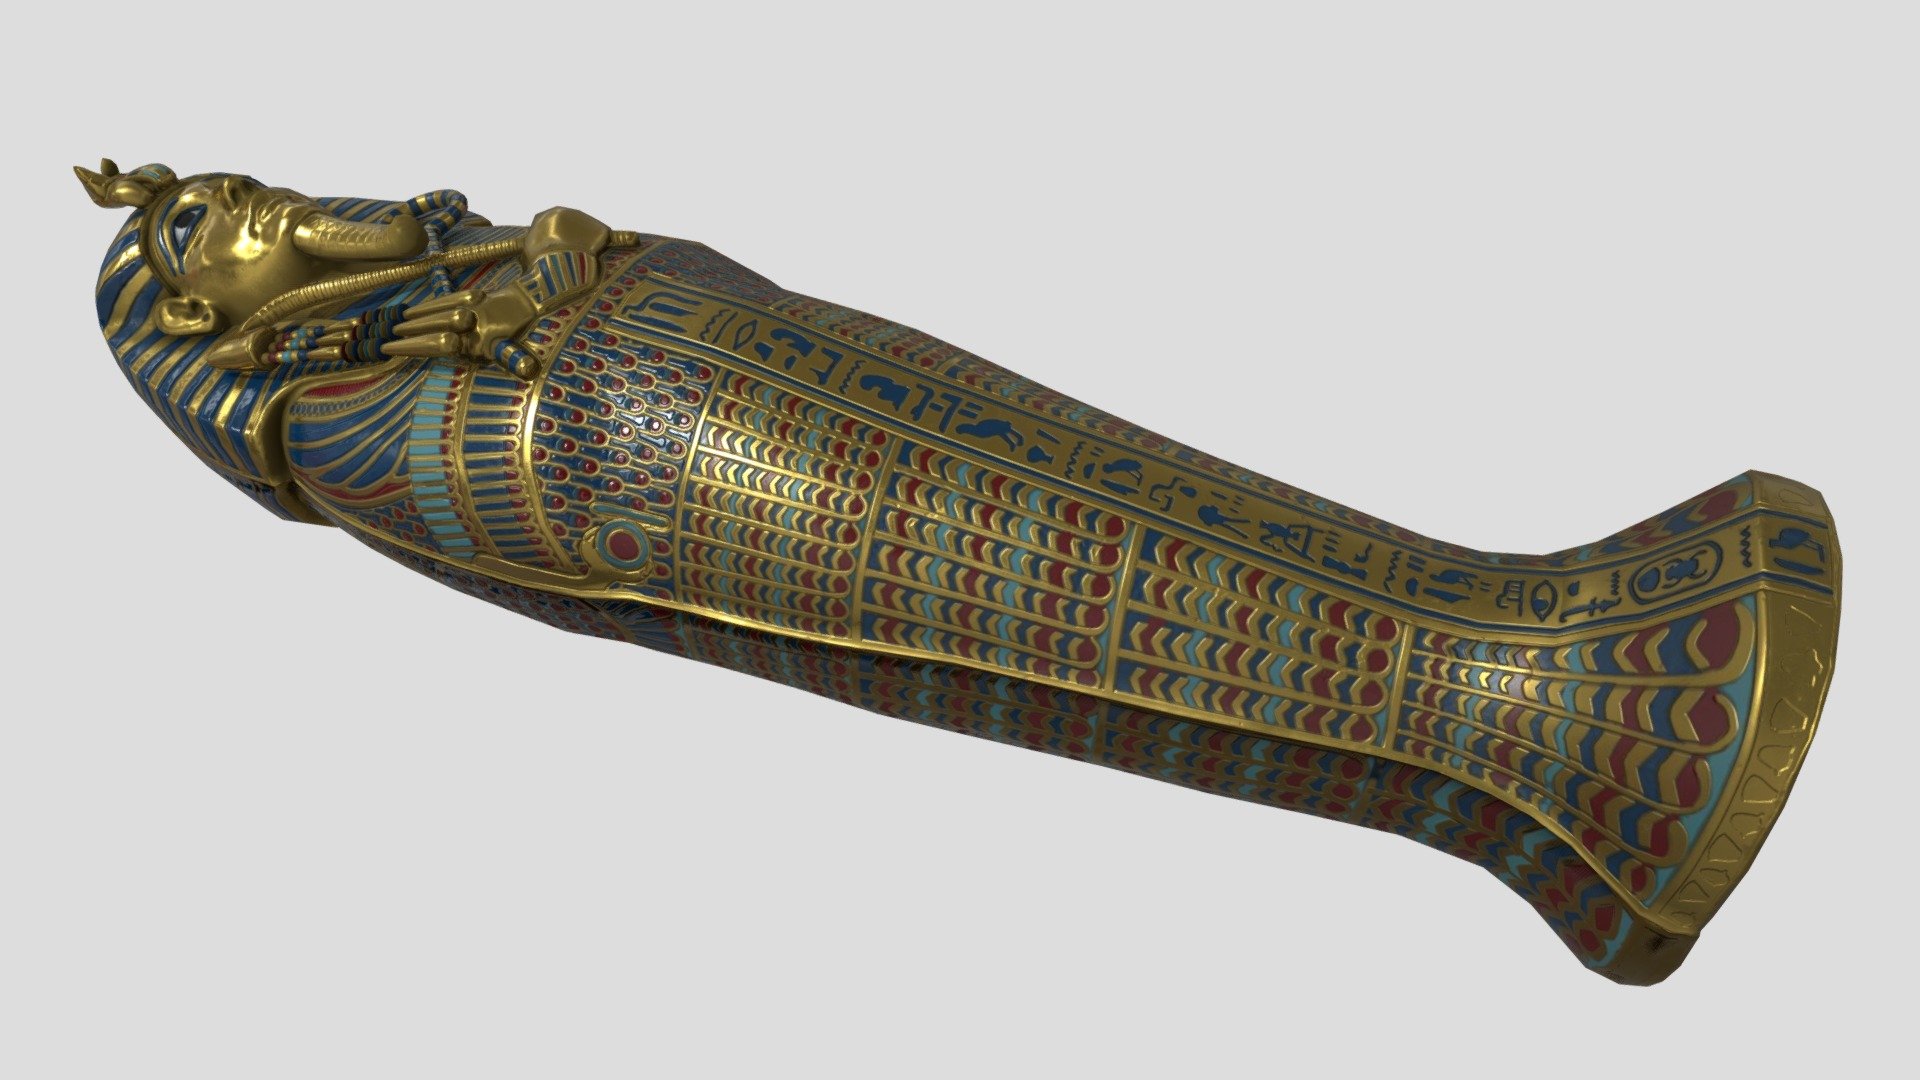 Golden Sarcophagus
The model has an optimized low poly mesh with the greatest possible number of simplifications that do not affect photo-realism but can help to simplify it, thus lightening your scene and allowing for using this model in real-time 3d applications.

Real-world accurate model.  In this product, all objects are ERROR-FREE and All LEGAL Geometry. Subdivisions are not required for this product.

Perfect for Architectural, Product visualization, Game Engine, and VR (Virtual Reality) No Plugin Needed.

Format Type




3ds Max 2017 (standard shader)

FBX

OBJ

3DS

Texture

2 material used. 2 different sets of textures:




Diffuse

Normal

Specular

Gloss

AO

Specular n Gloss [.tga additional texture]

You might need to re-assign textures map to model in your relevant software - Golden Sarcophagus - Buy Royalty Free 3D model by luxe3dworld 3d model